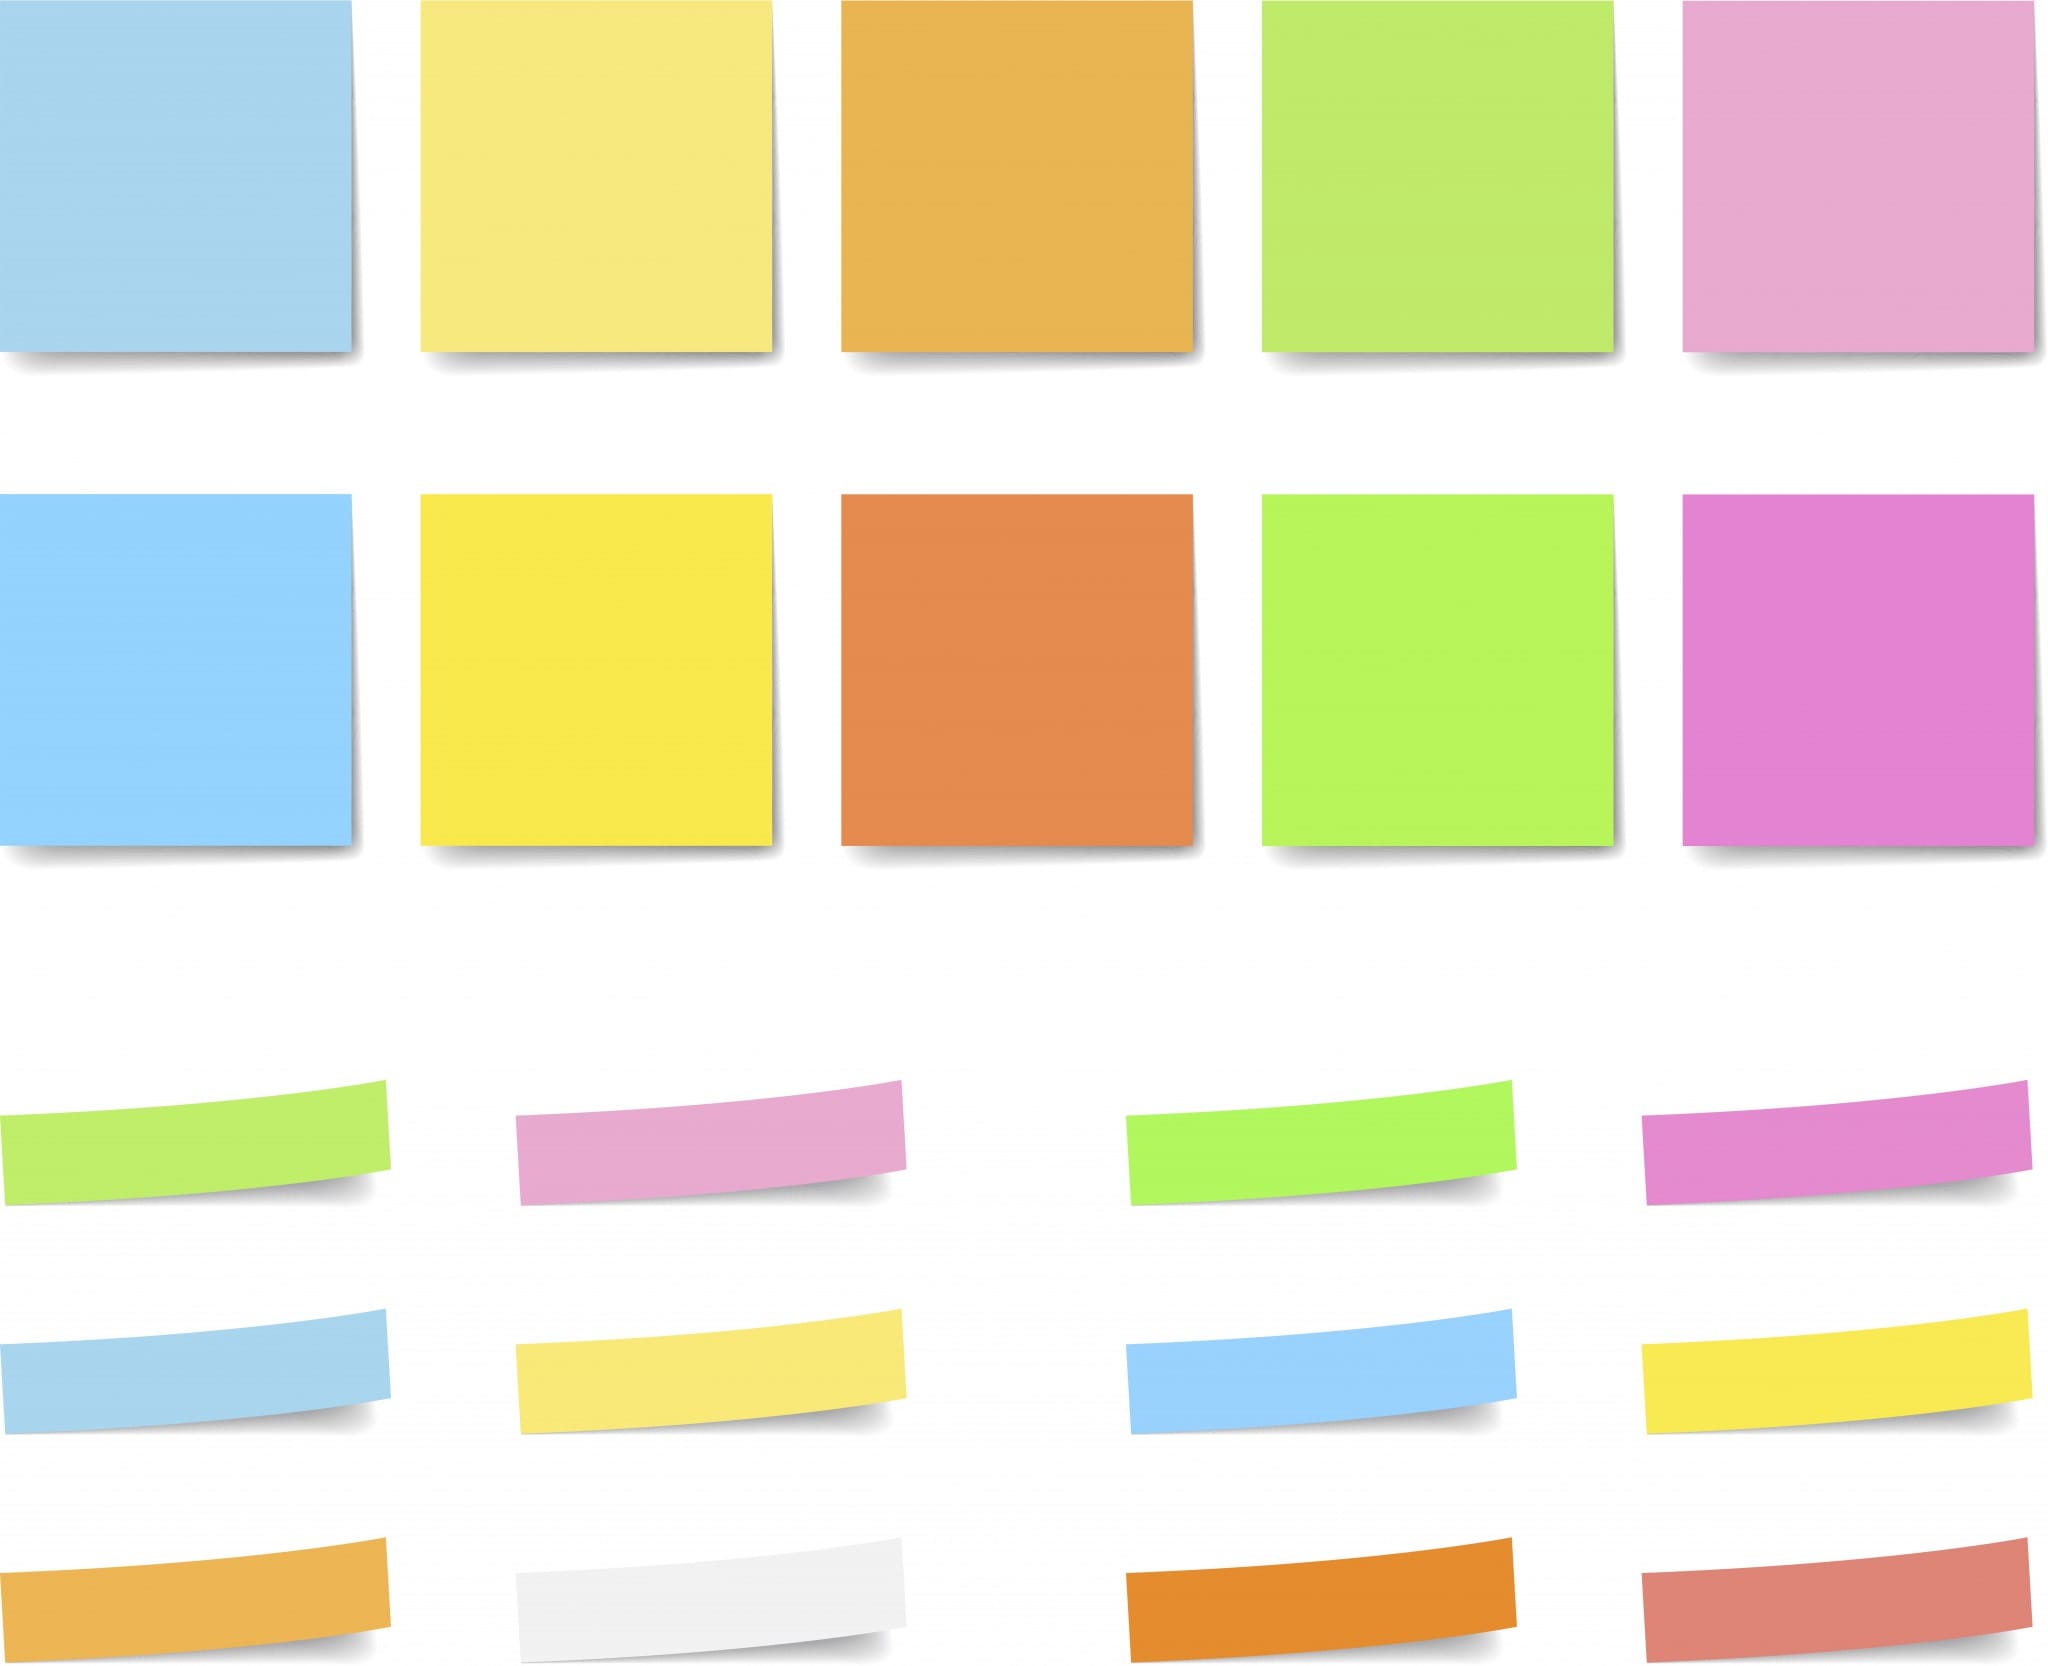 Post-Its are organized by color.